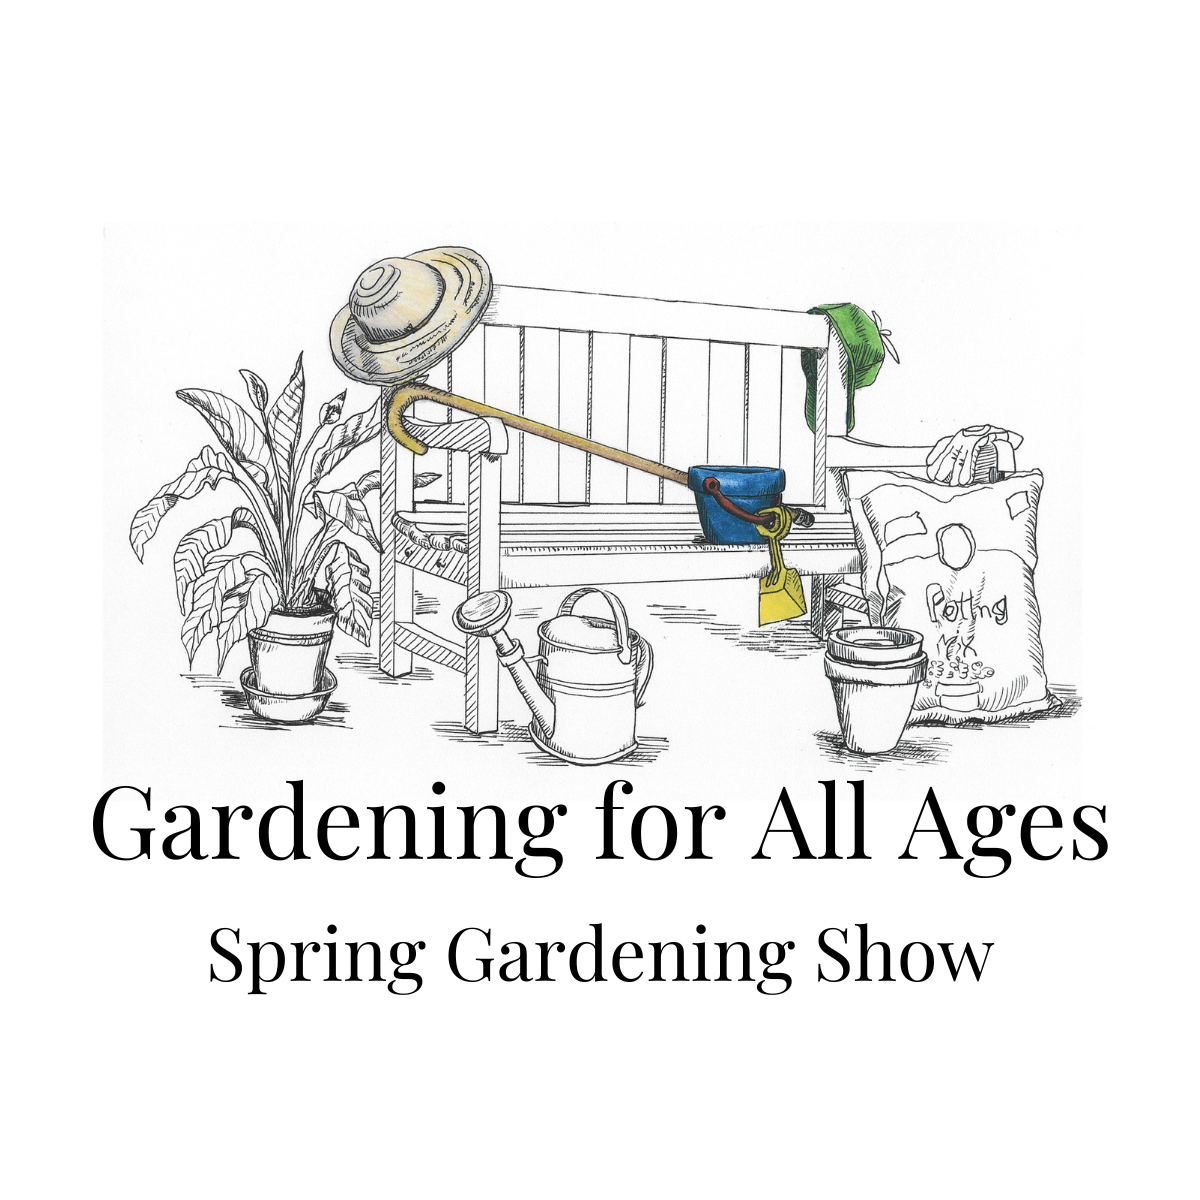 an image of a garden bench surrounded by tools, such as buckets, shovels and bags of mulch. there is a hat hangin from one end and a plant to the left of the bench. the text reads, gardening for all ages, spring gardening show